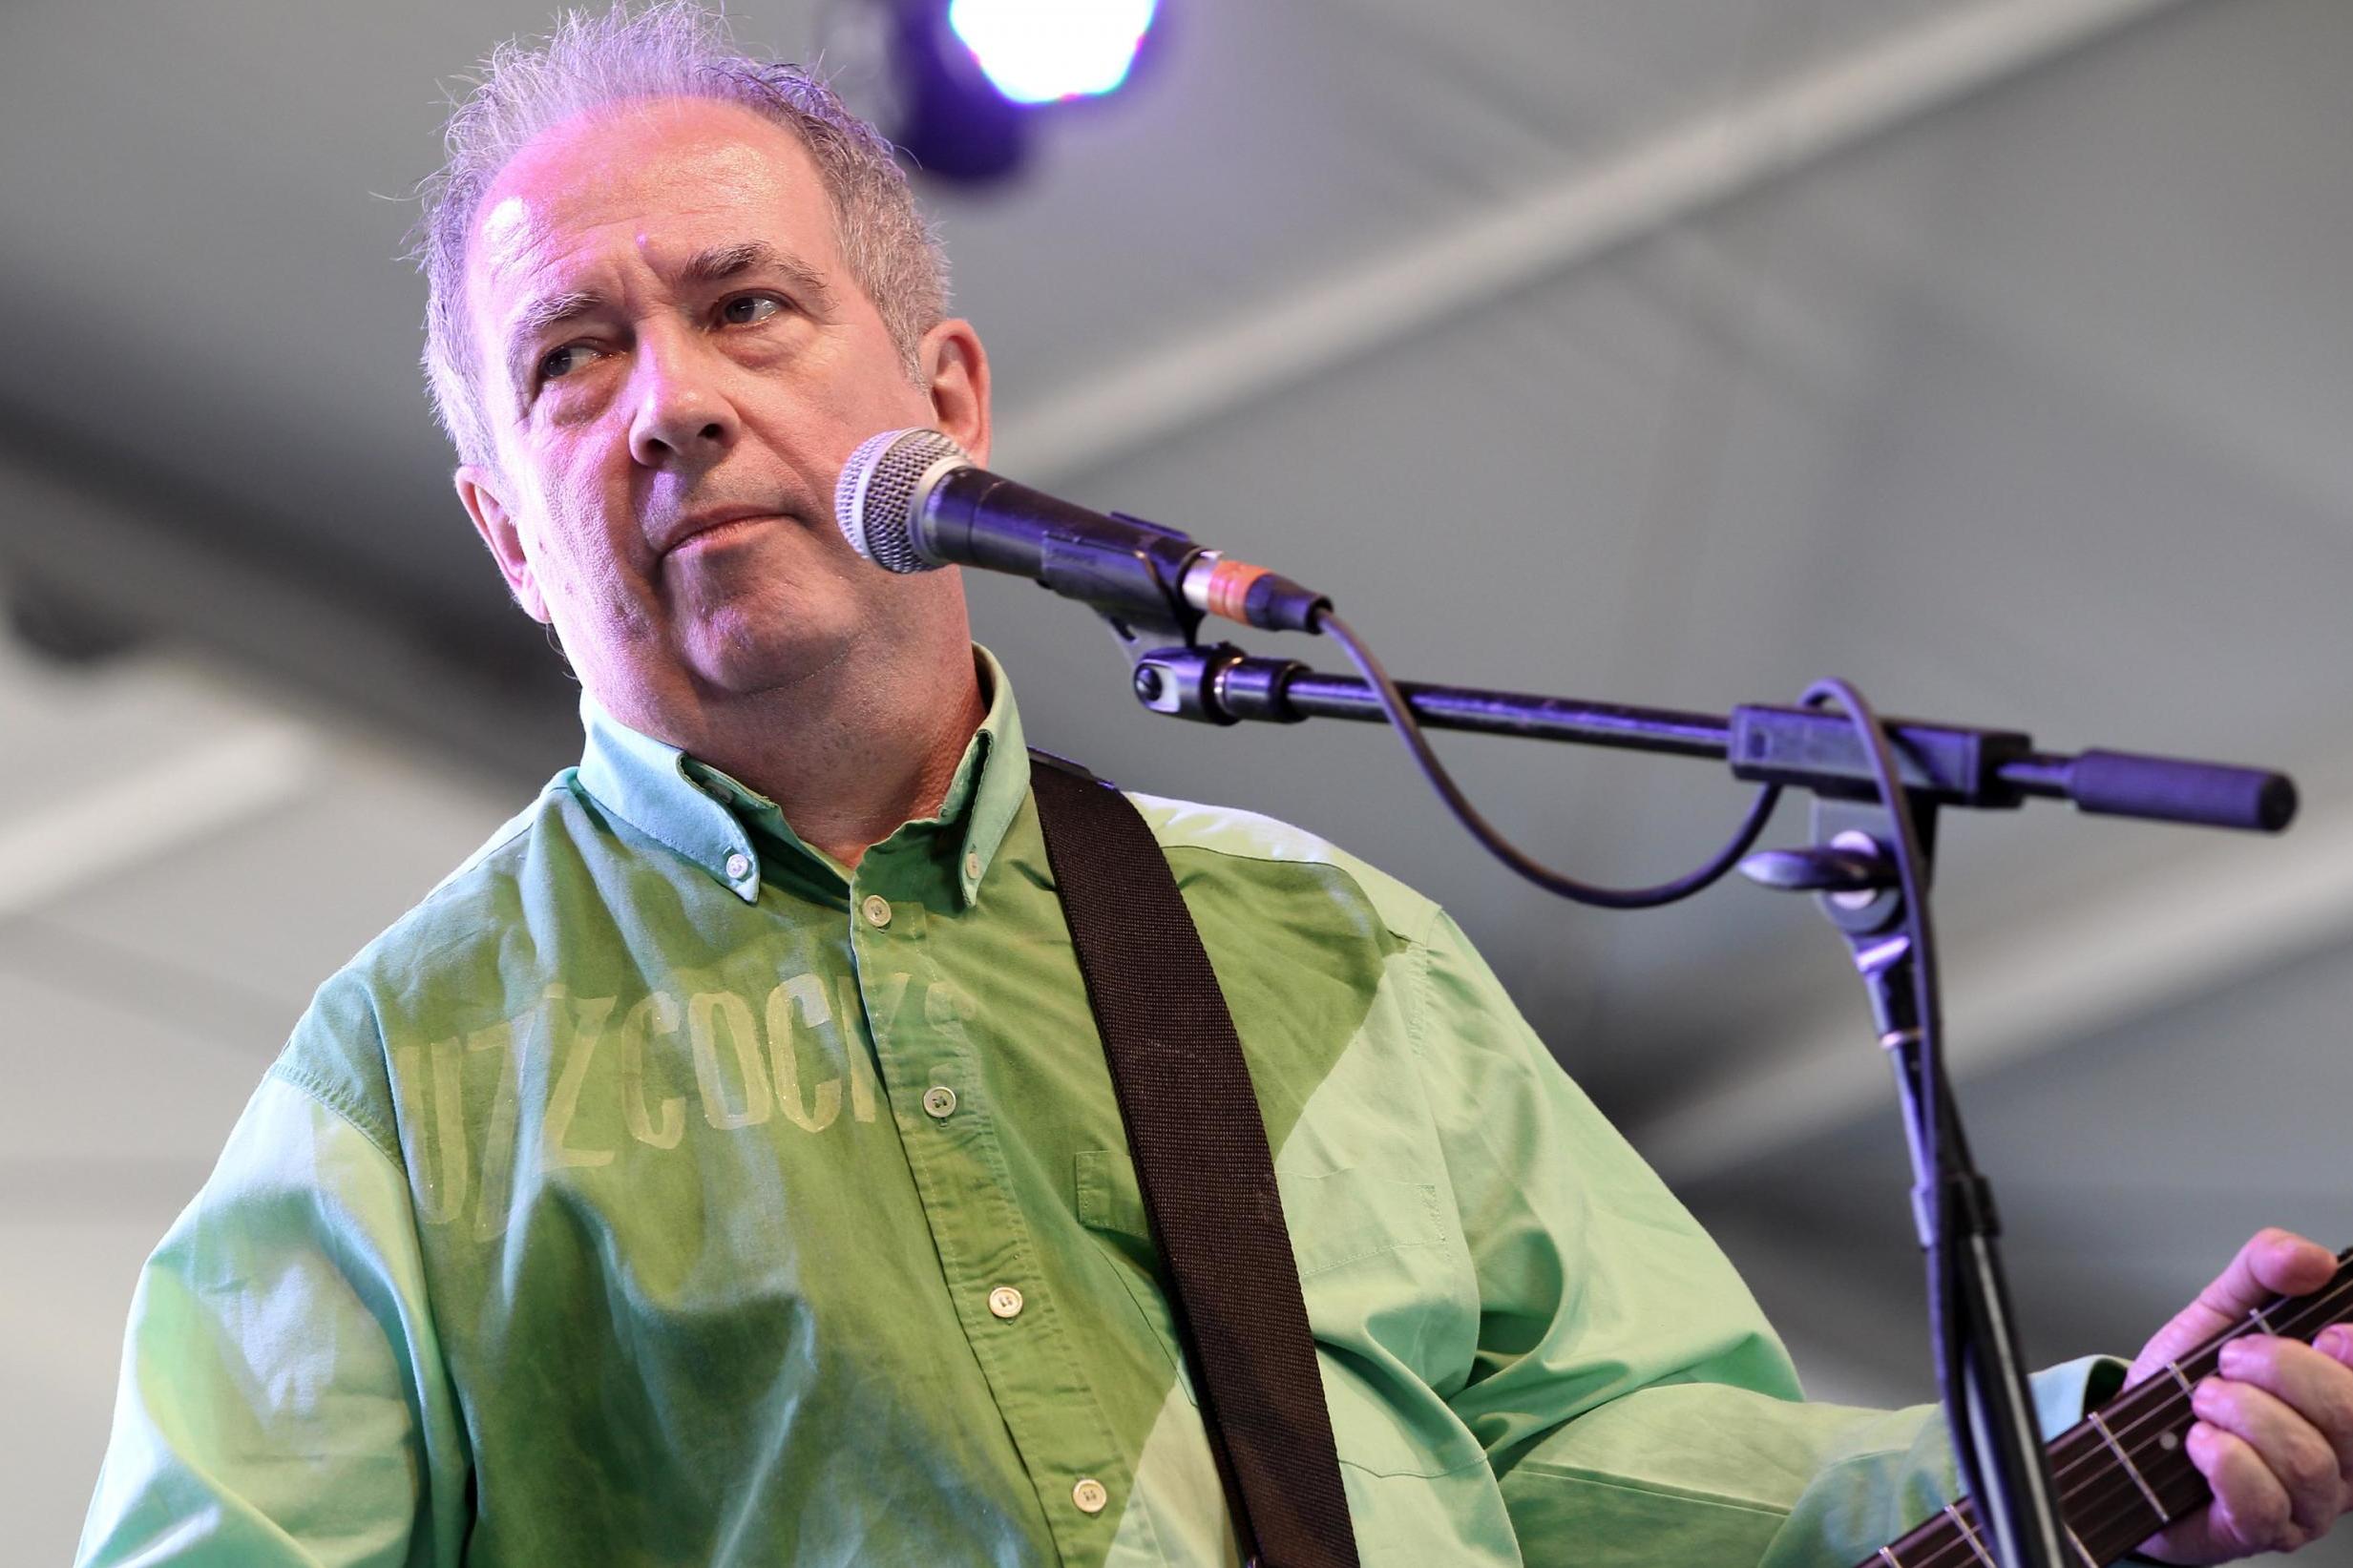 Musician Pete Shelley of Buzzcocks perform onstage during day two of the 2012 Coachella Valley Music &amp; Arts Festival at the Empire Polo Field on 14 April, 2012 in Indio, California. ((Photo by Karl Walter/Getty Images for Coachella))